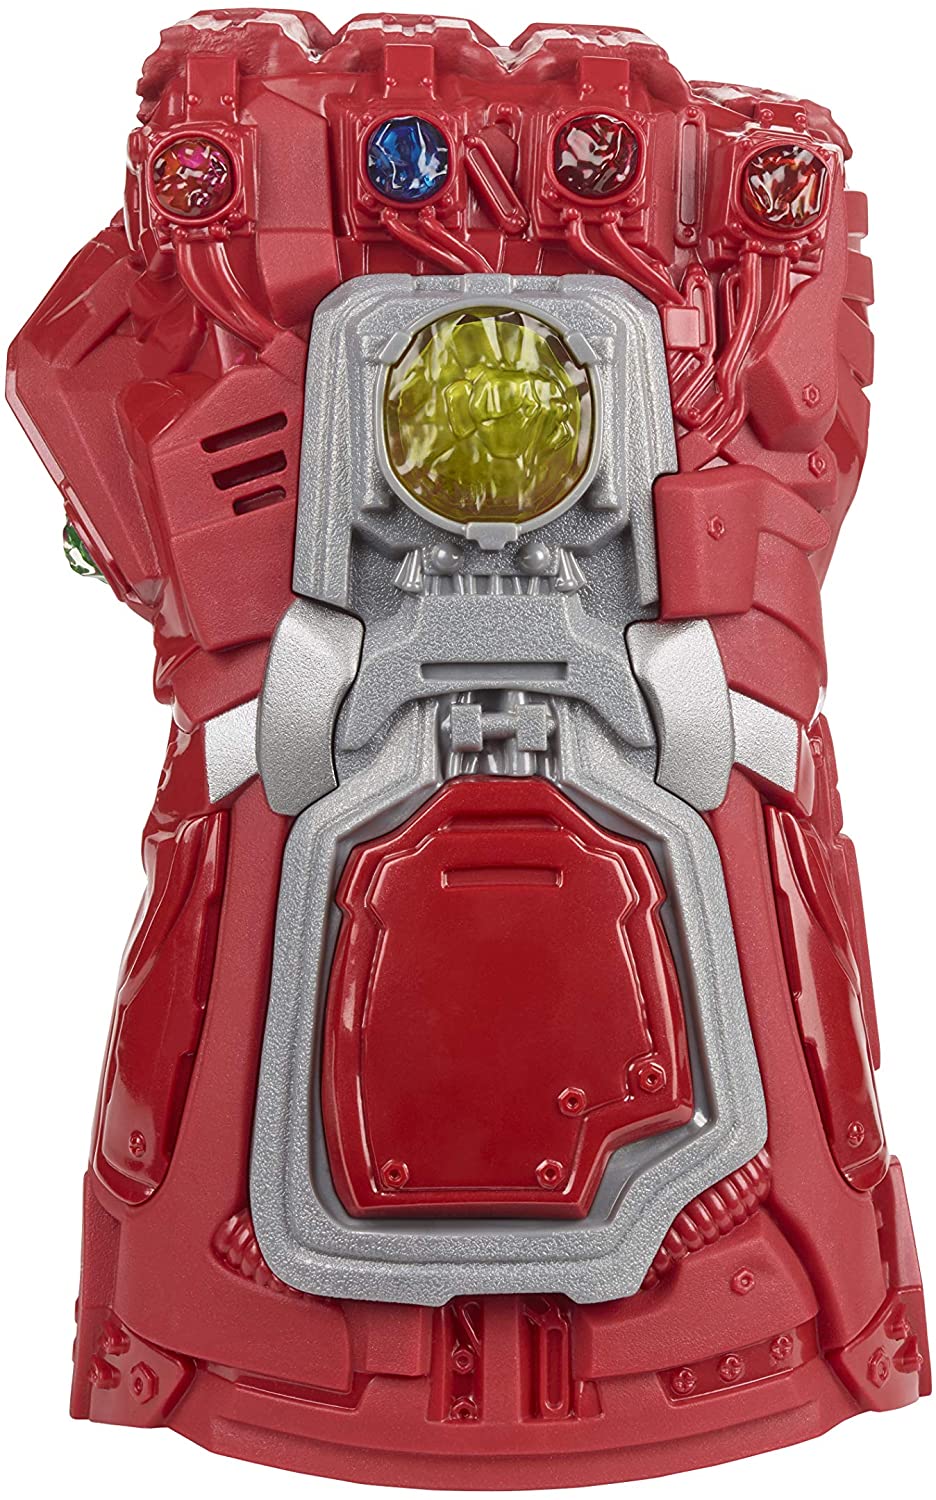 Marvel Avengers Red Infinity Gauntlet Toy w/ Lights & Sounds $11.43 + Free Shipping w/ Prime or on orders over $35